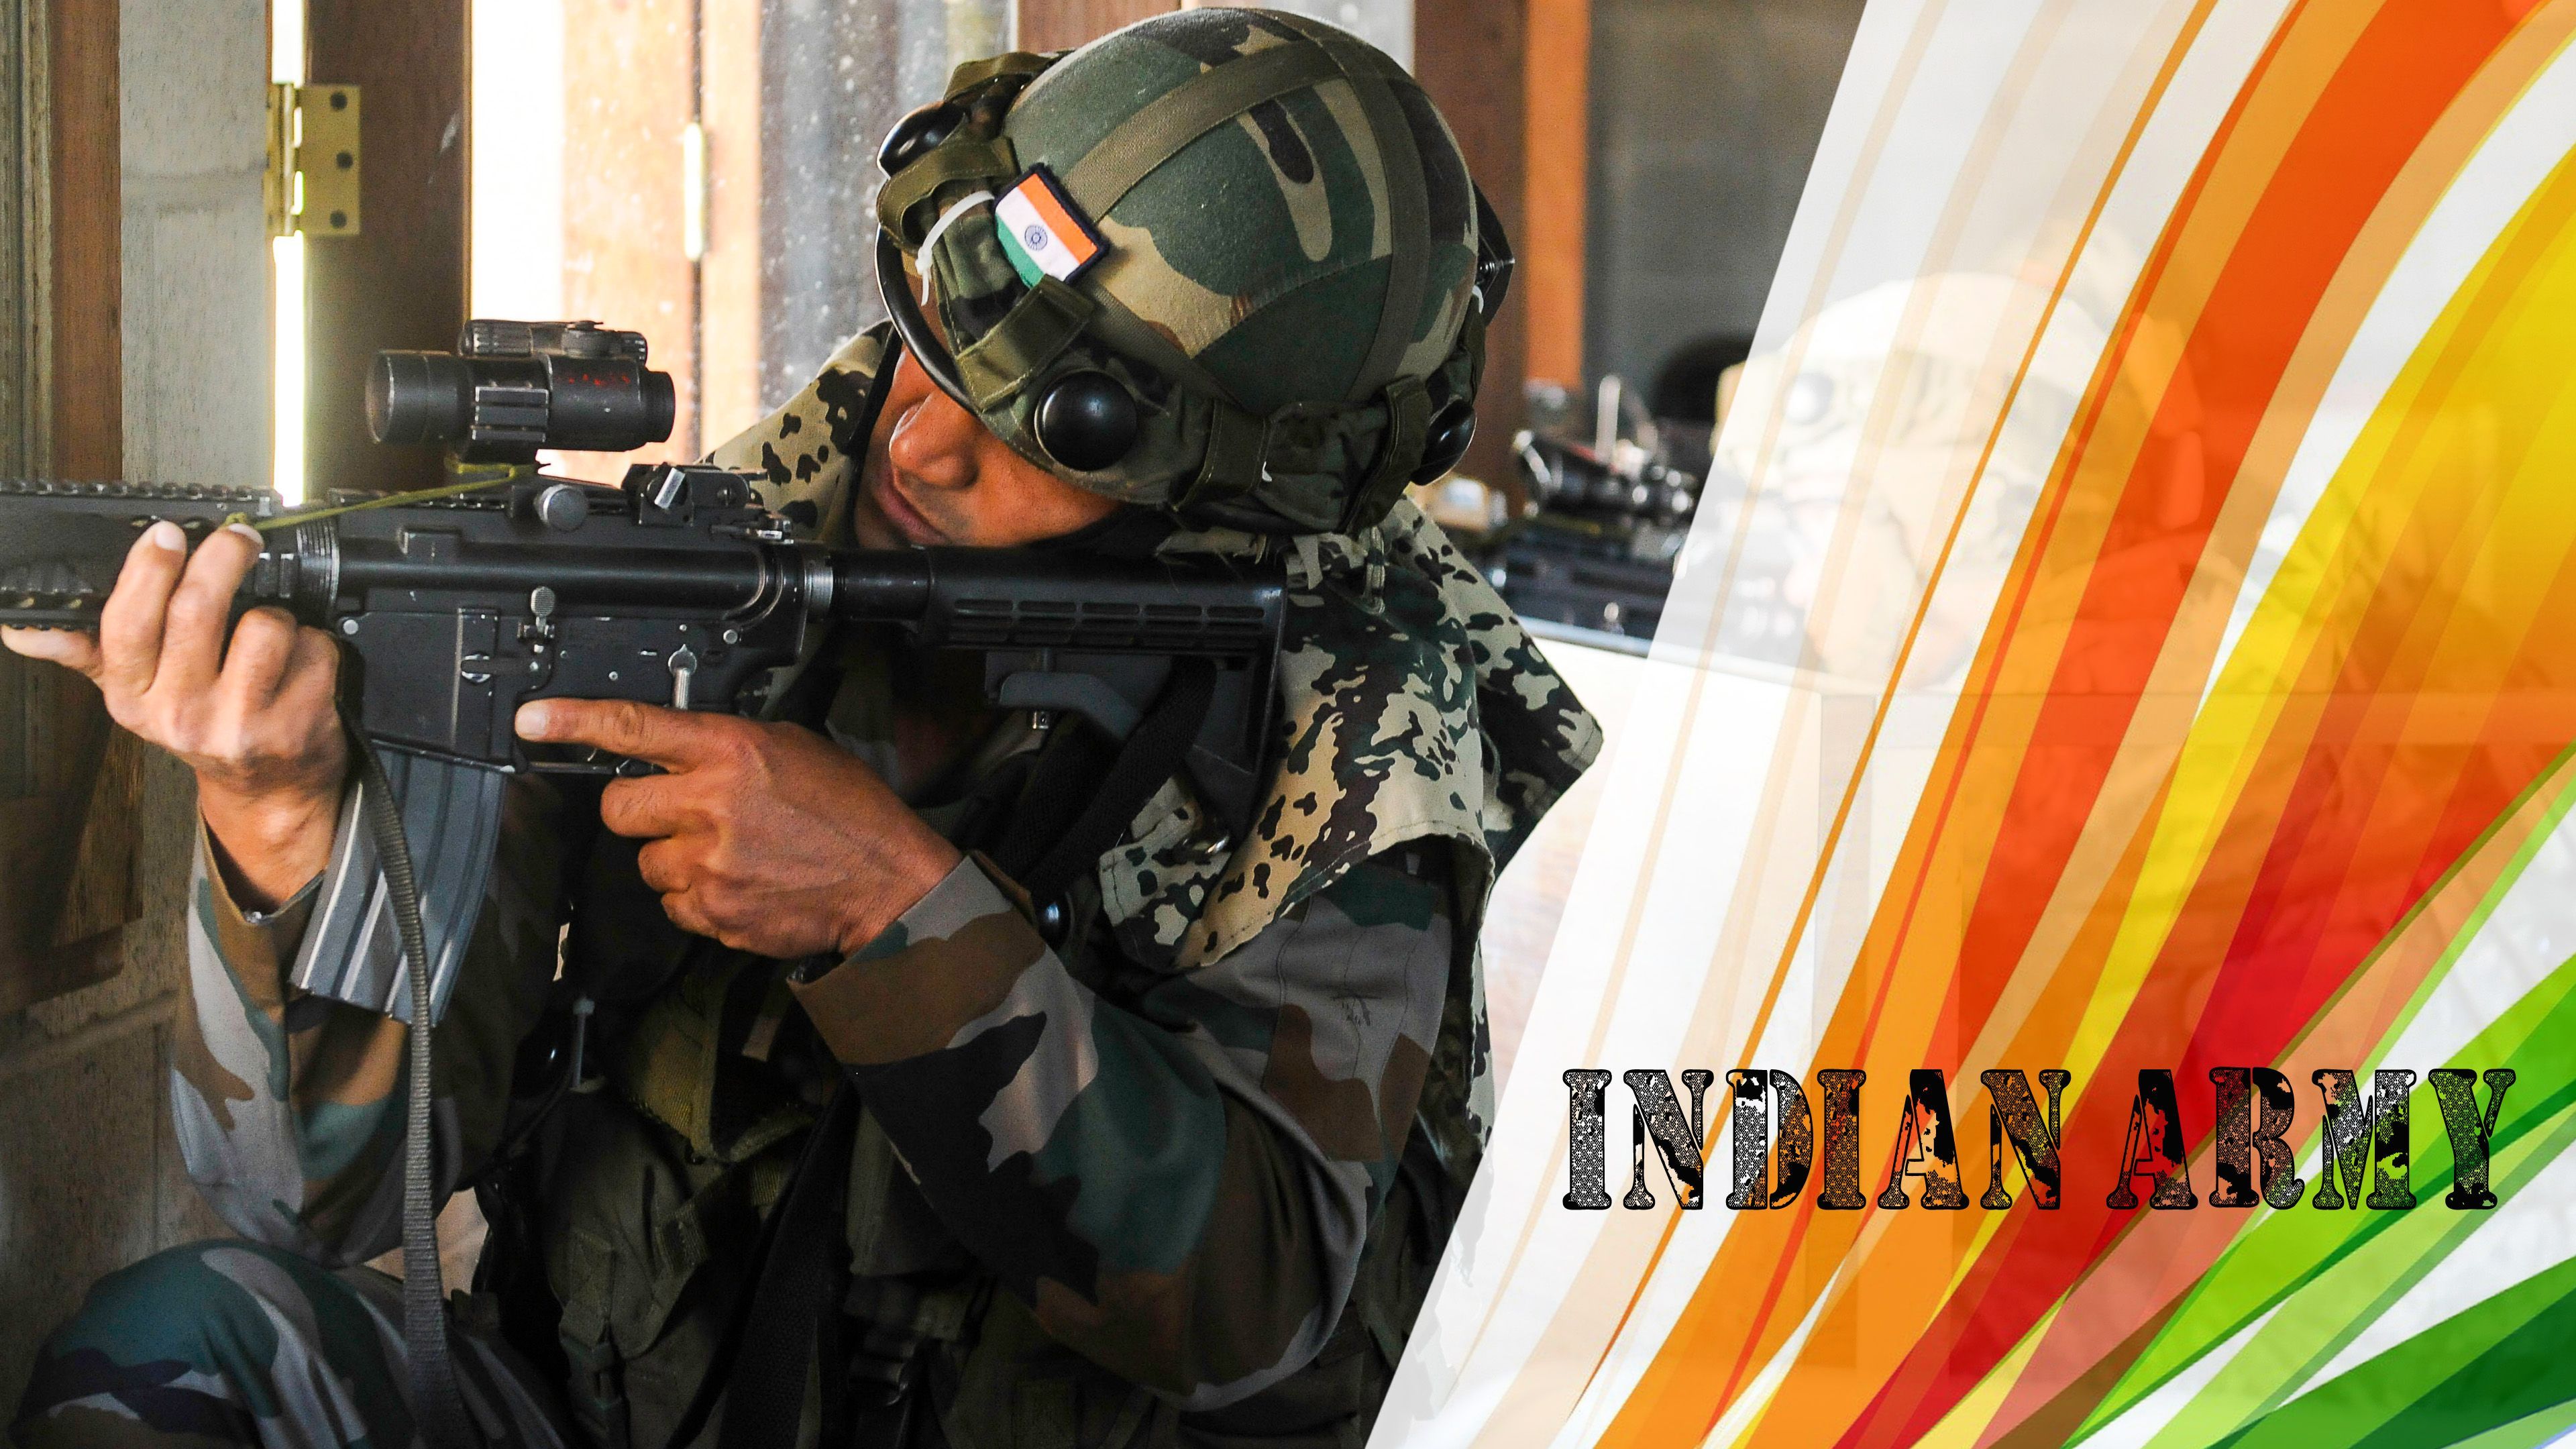 1080p Image: Indian Army HD Wallpaper 1080p For PC